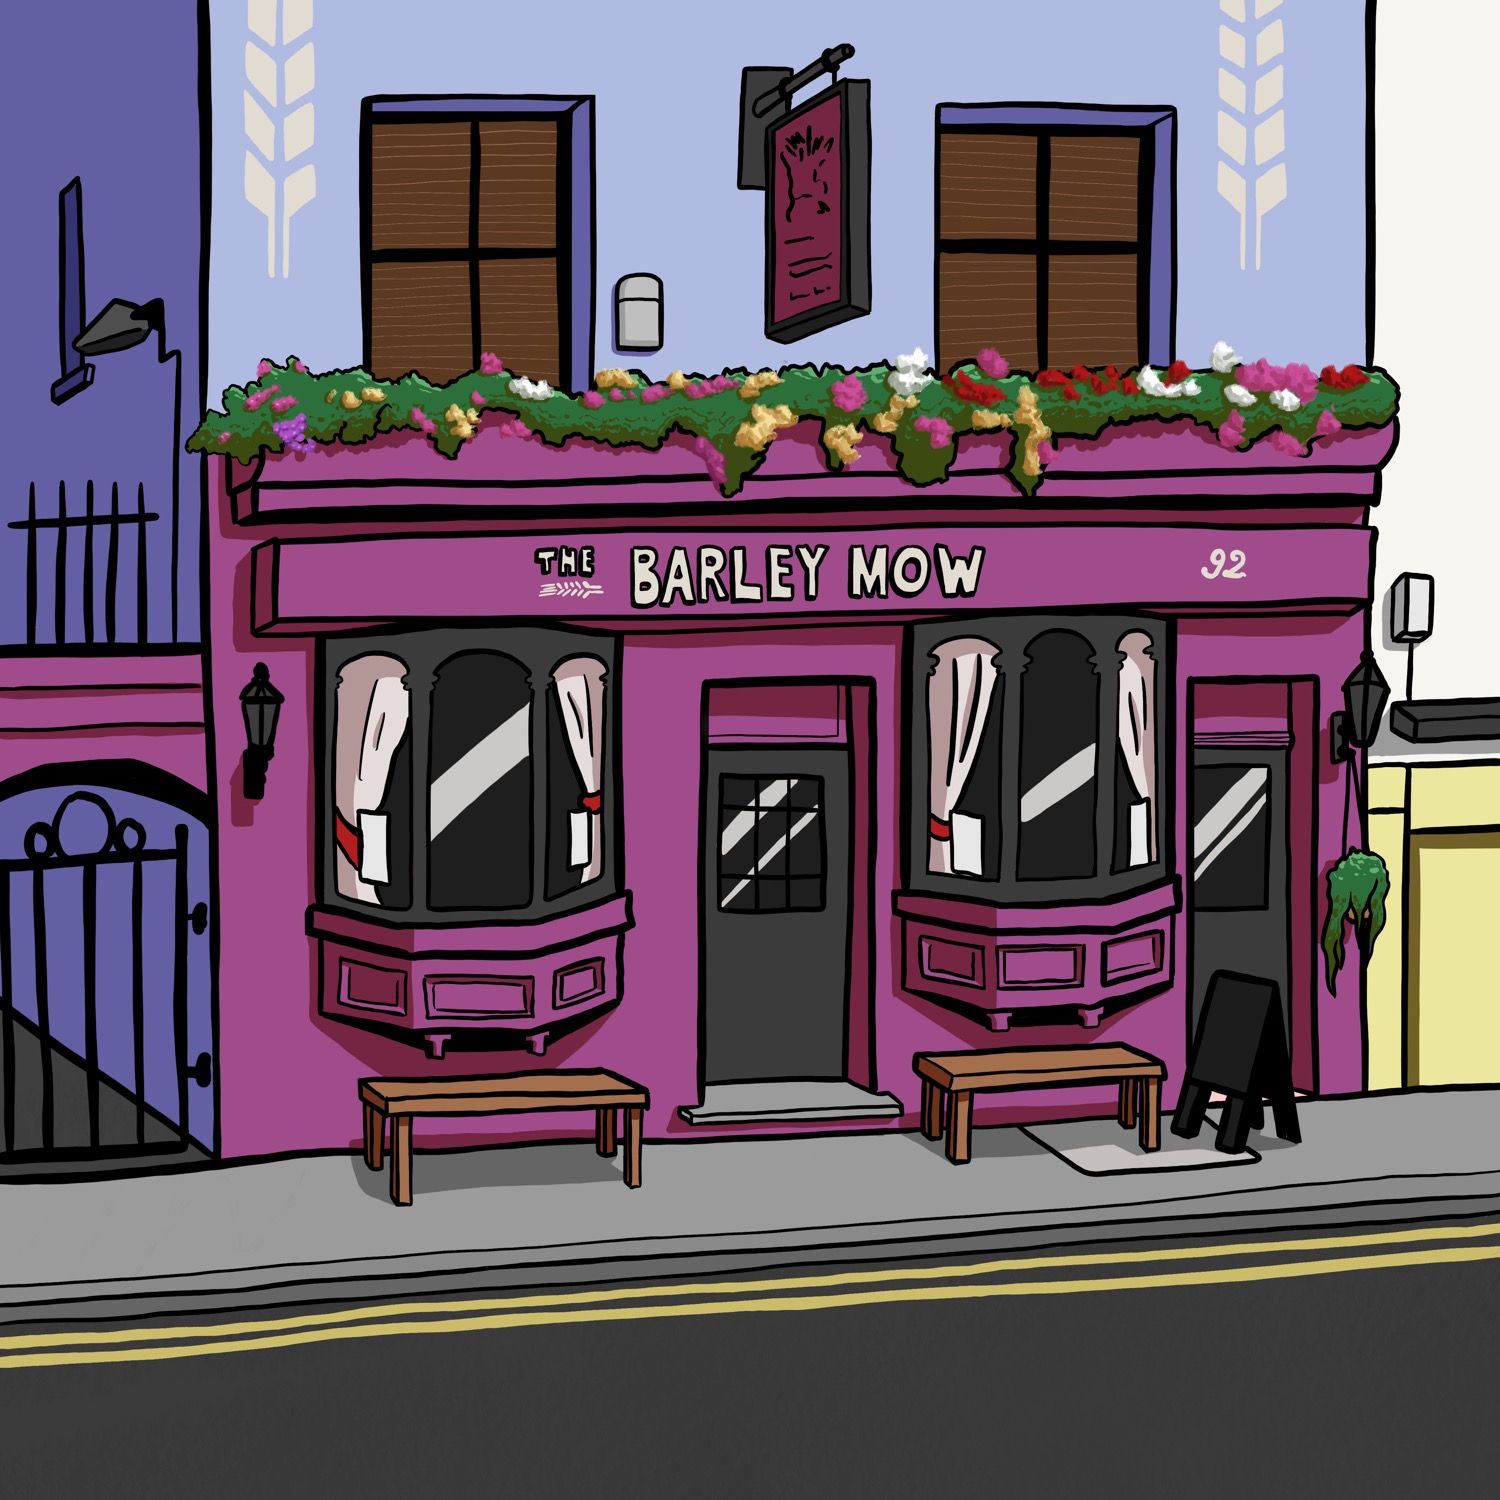 An illustration of the Barley Mow pub in Kemptown, which has a bright purple façade with a long flower box above its ground floor bay windows and door.